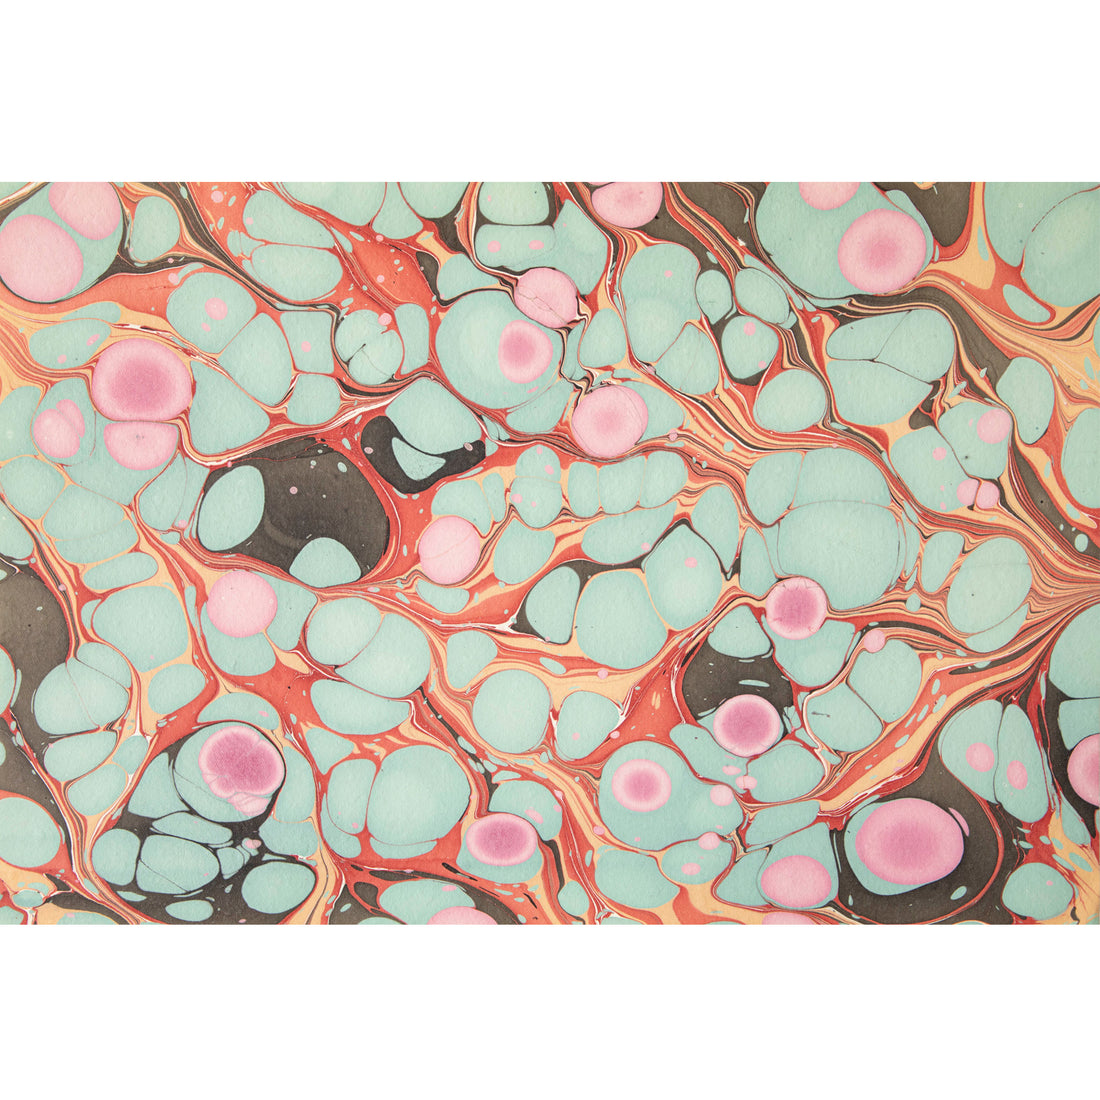 An abstract, marbled pattern consisting of bubbles of seafoam, pink and dark grey, over a swirled background of red and gold.